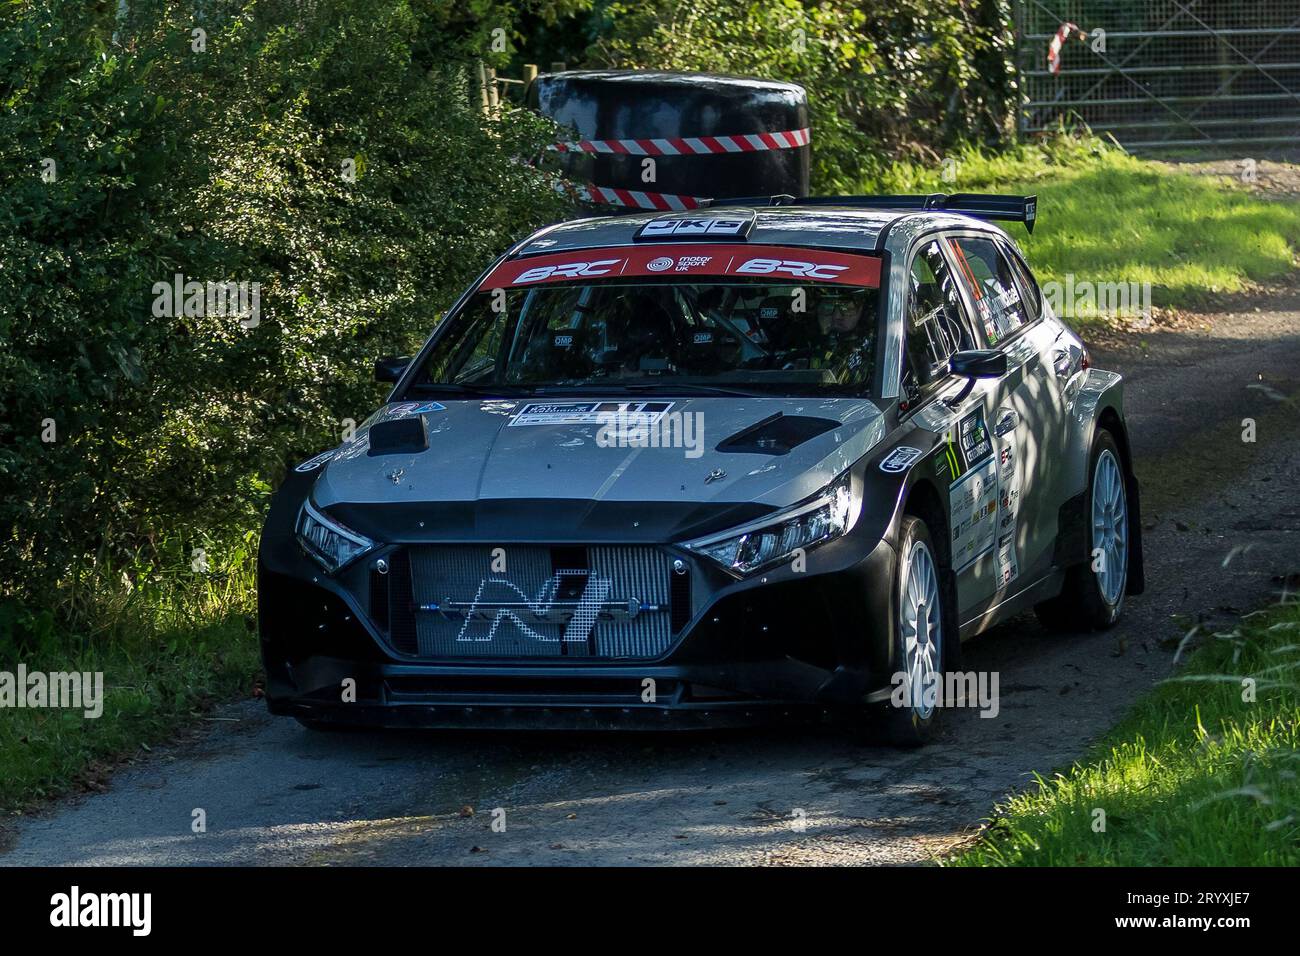 Ceredigion, Wales - 02 September 2023 Rali Ceredigion: Alan Carmichael and  Co-Driver Claire Williams in a Hyundai I20 Rally2 car 11 on stage SS1 Bort  Stock Photo - Alamy